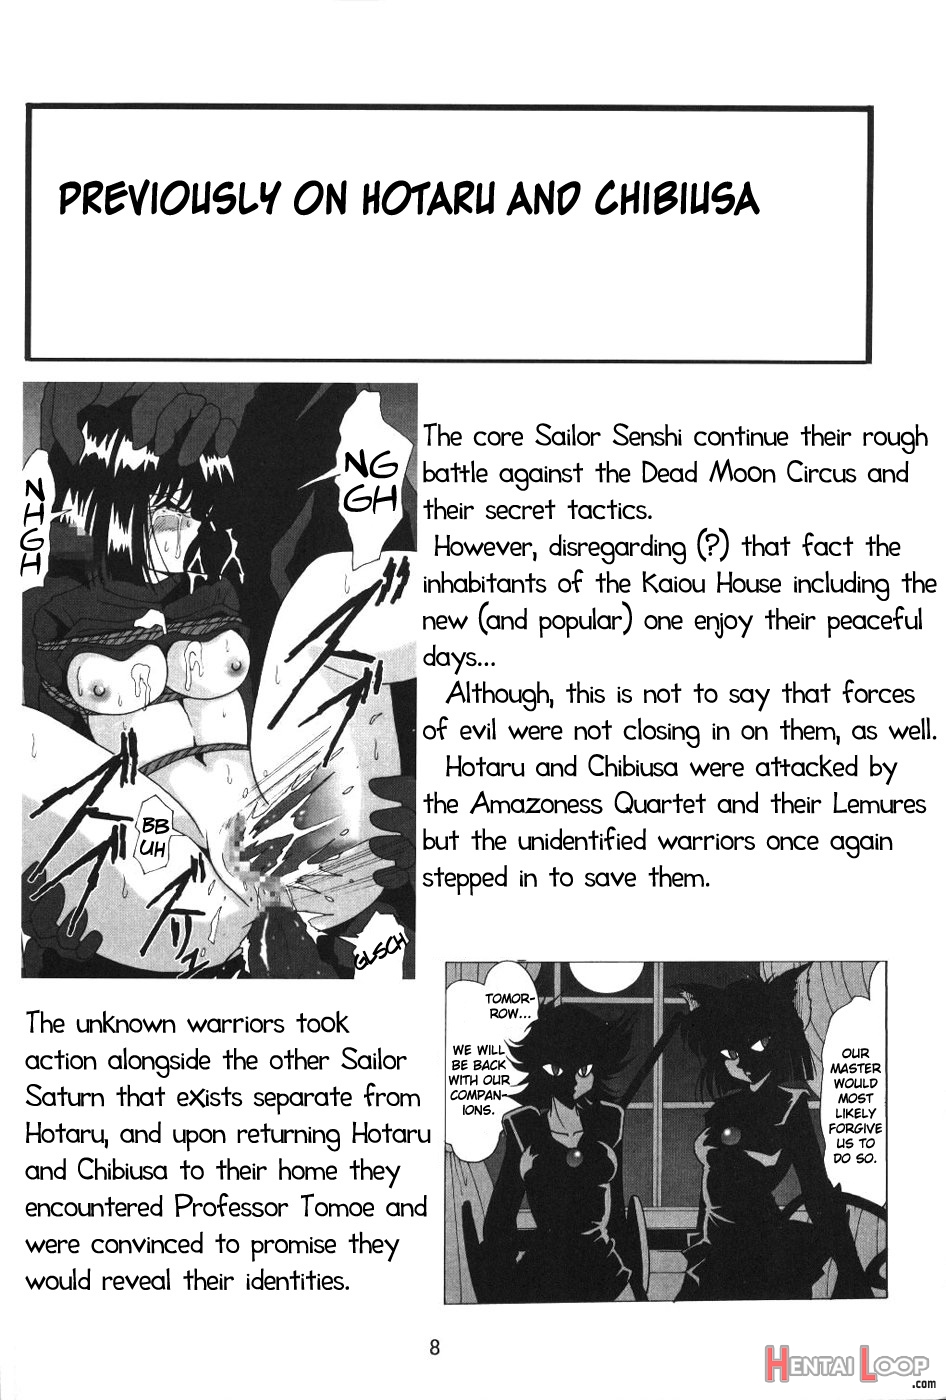 Silent Saturn Ss Vol. 7 page 8